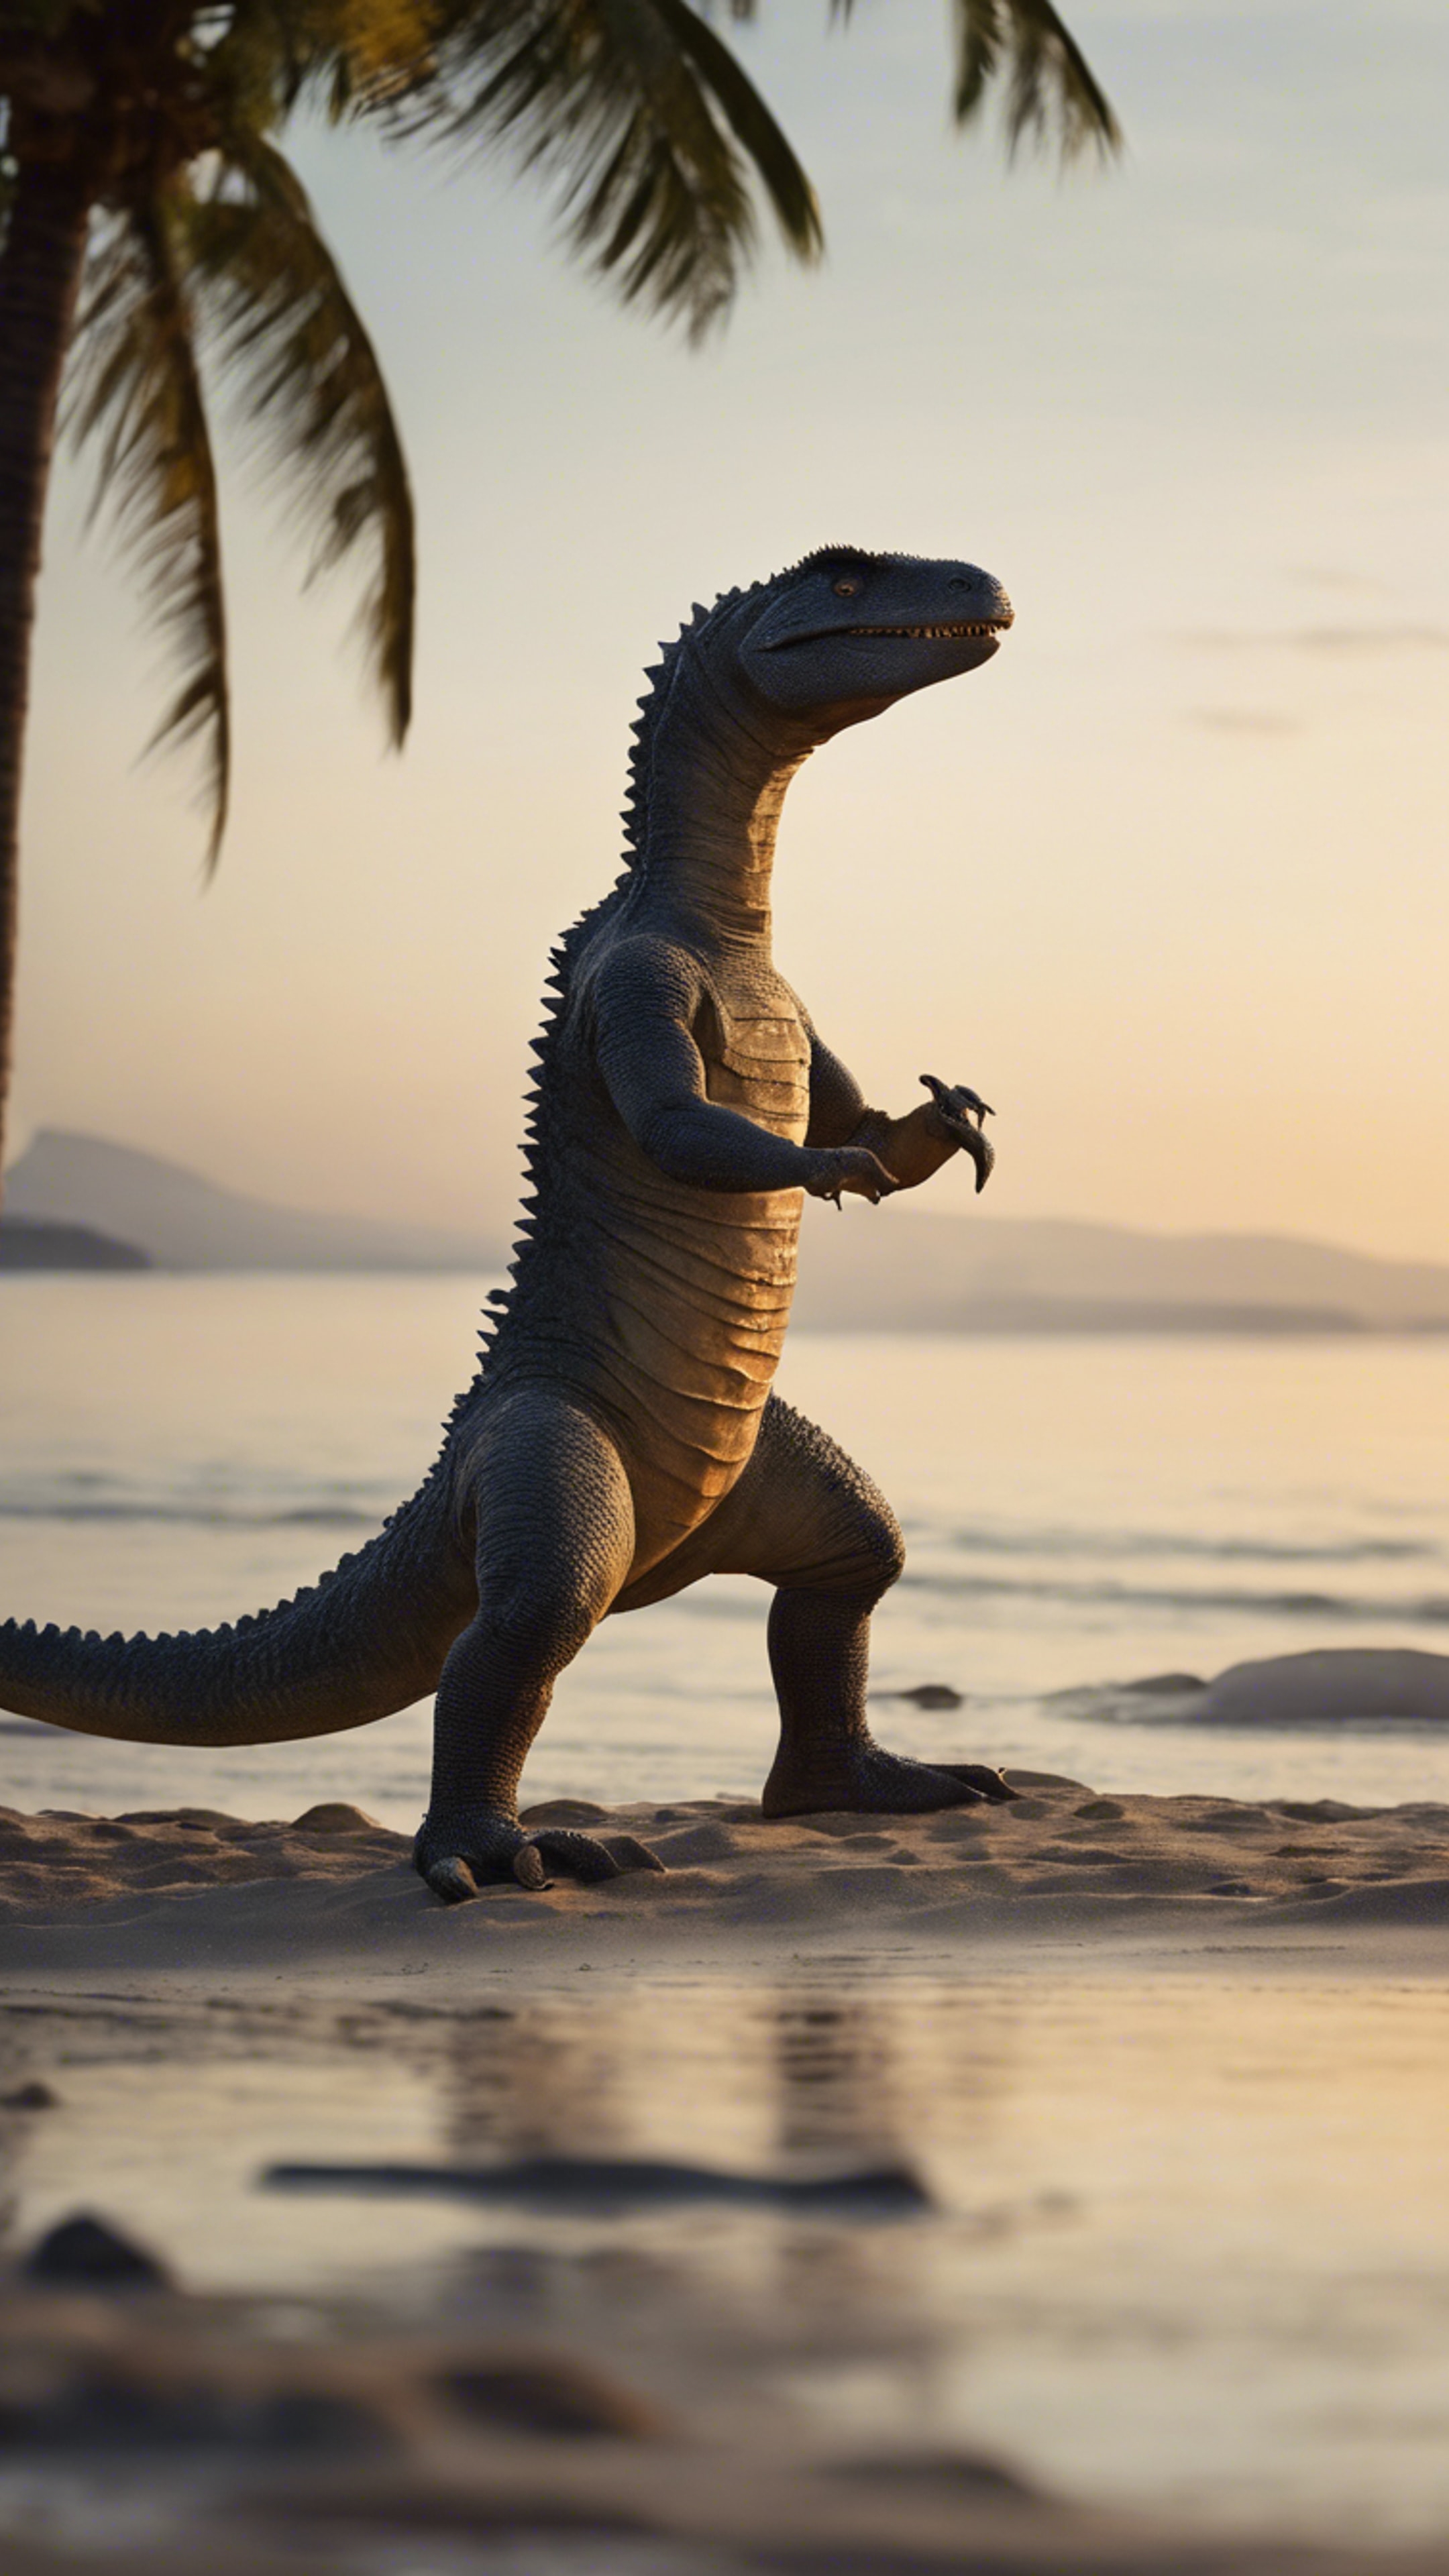 A tranquil scene of Thescelosaurus practicing Tai-Chi during the early dawn on a peaceful beach. Tapeta[4138bc2c7b604ba6814f]